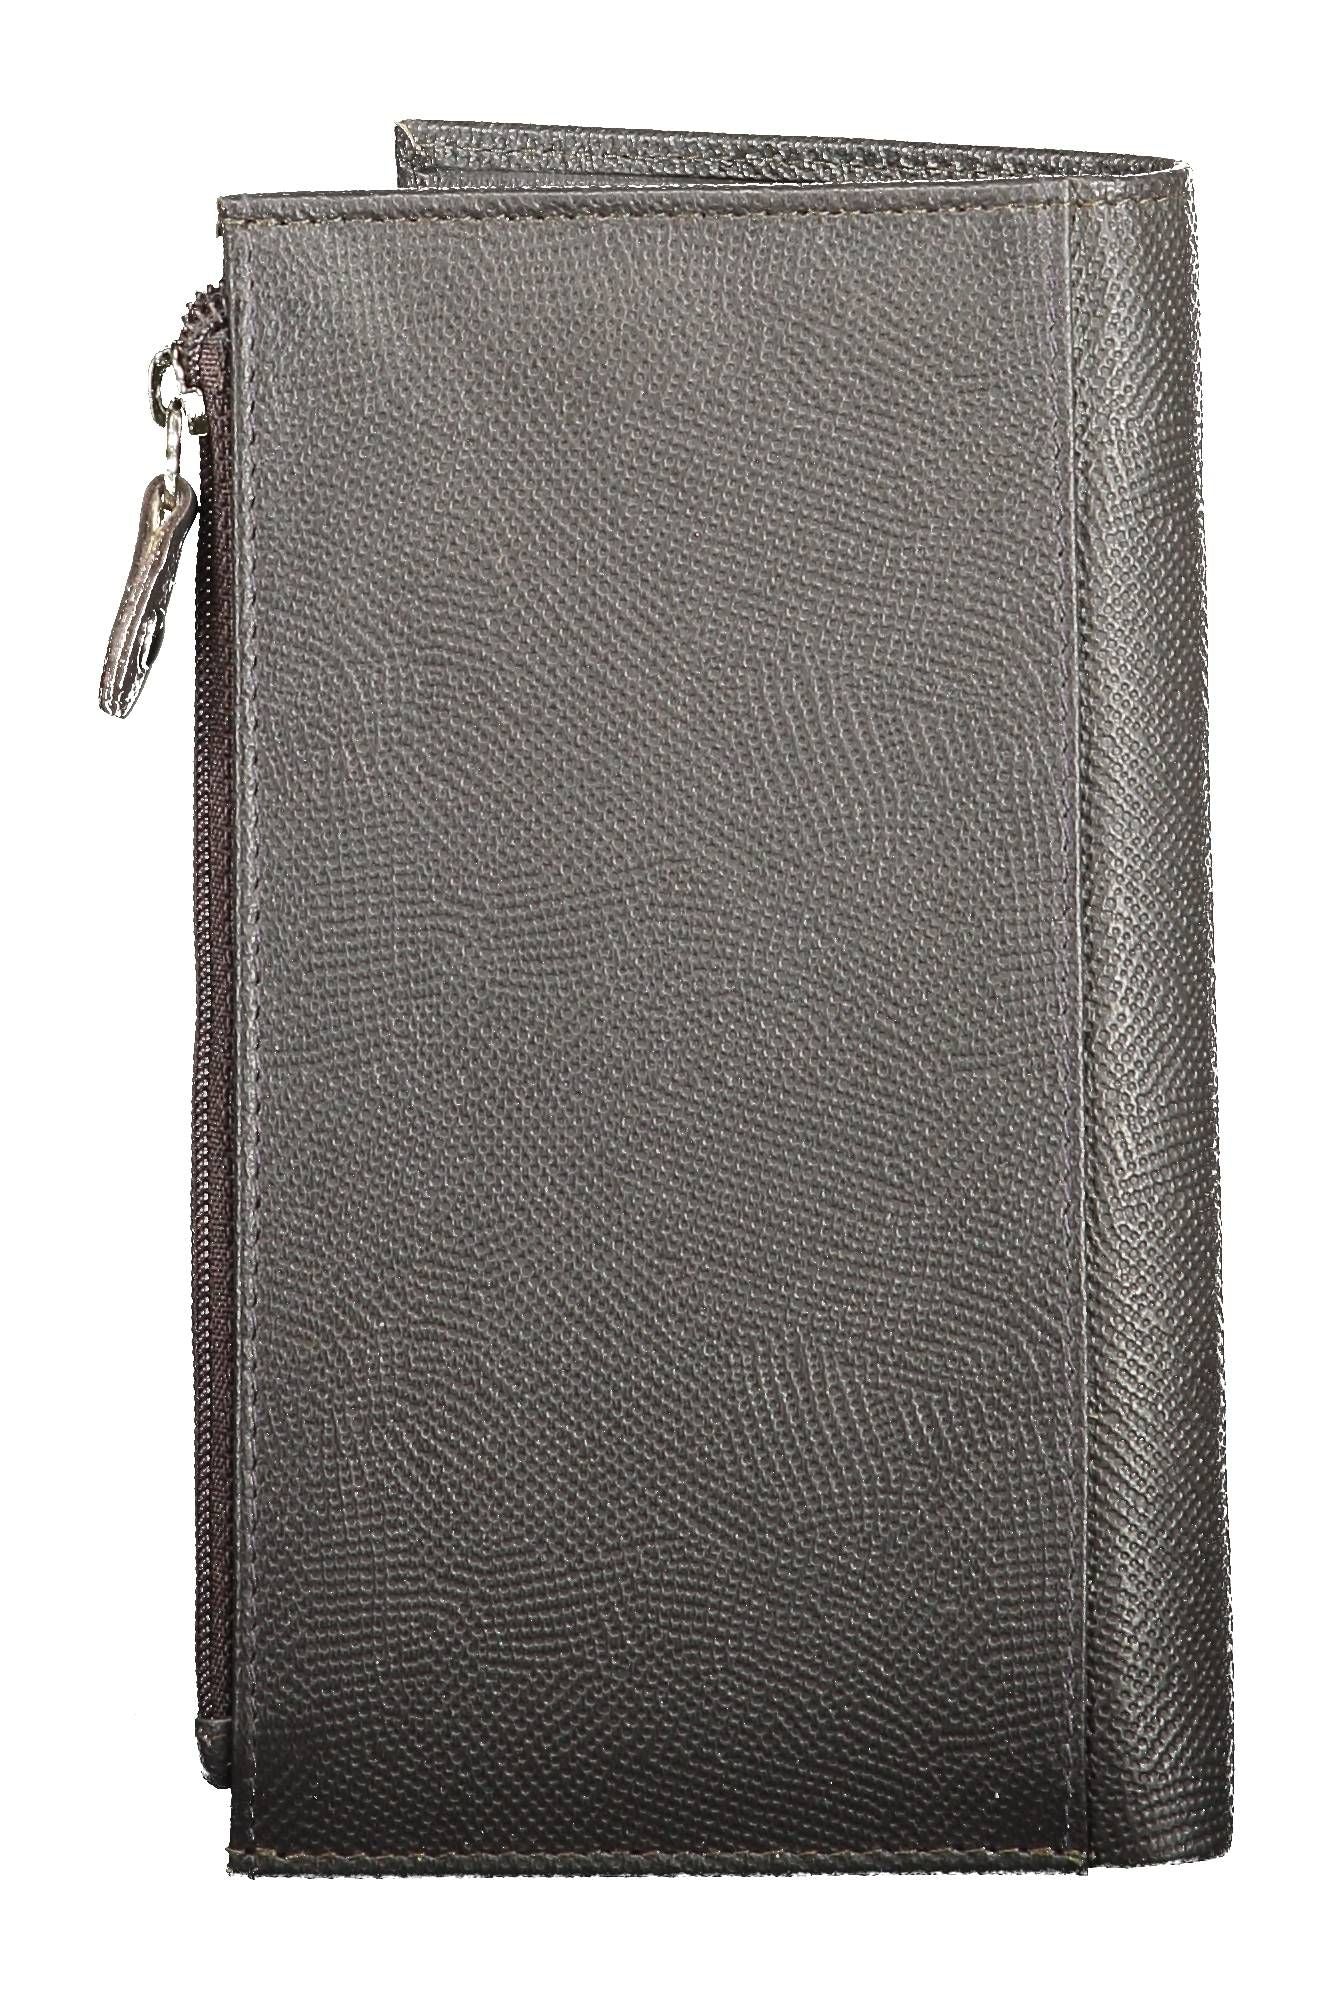 Elegant Leather Bifold Wallet with Coin Pocket